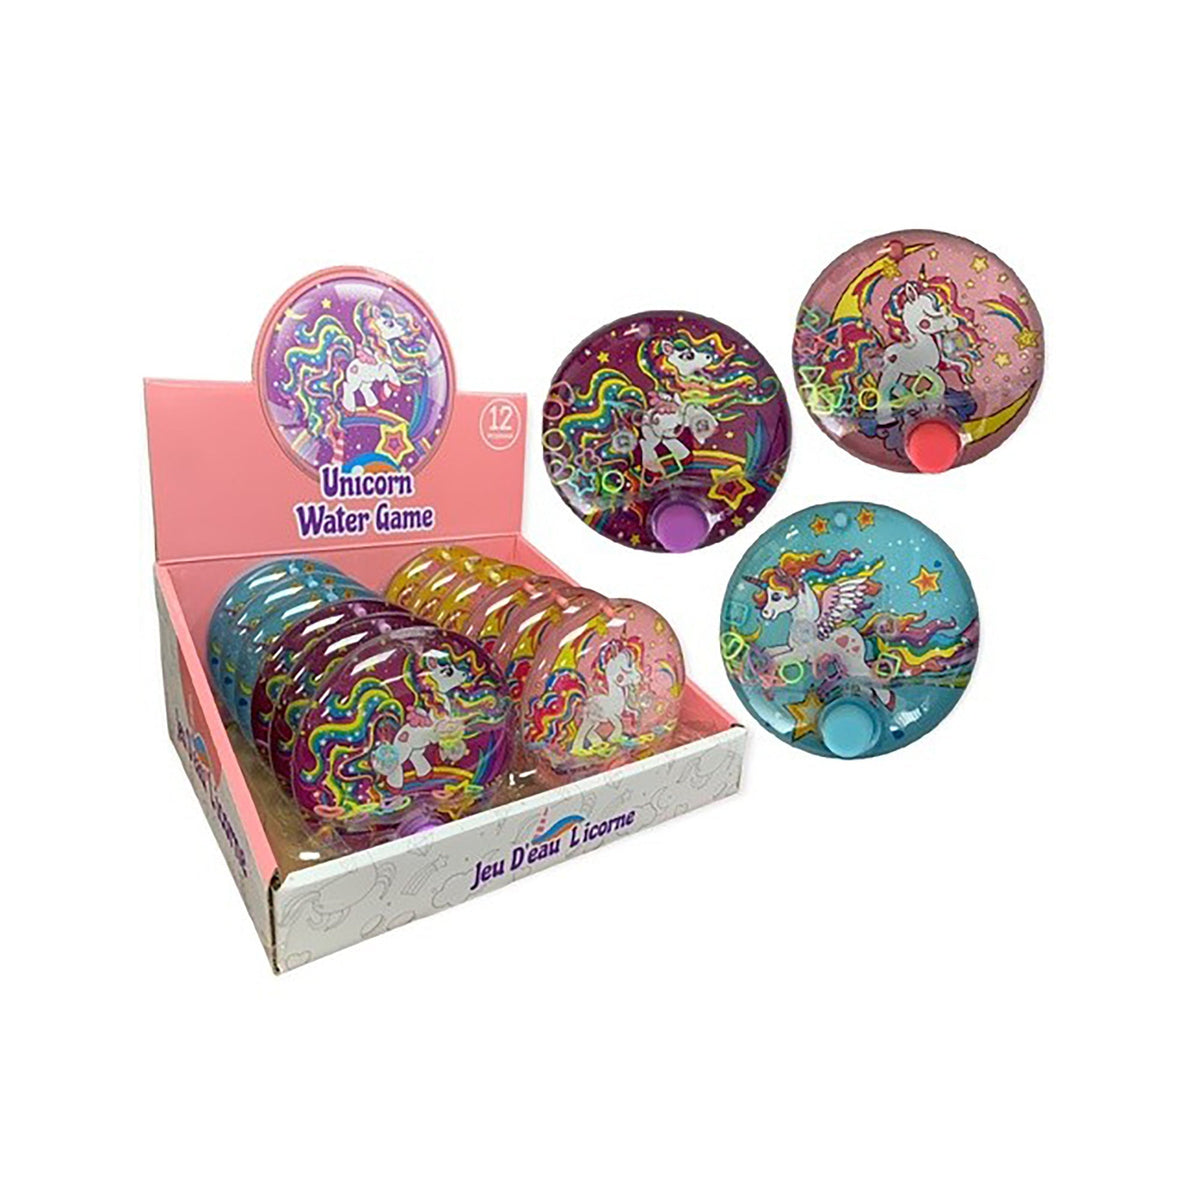 HANDEE PRODUCTS/LES PRODUITS H Impulse Buying Portable Unicorn Water Game, Assortment, 1 Count 064049517219